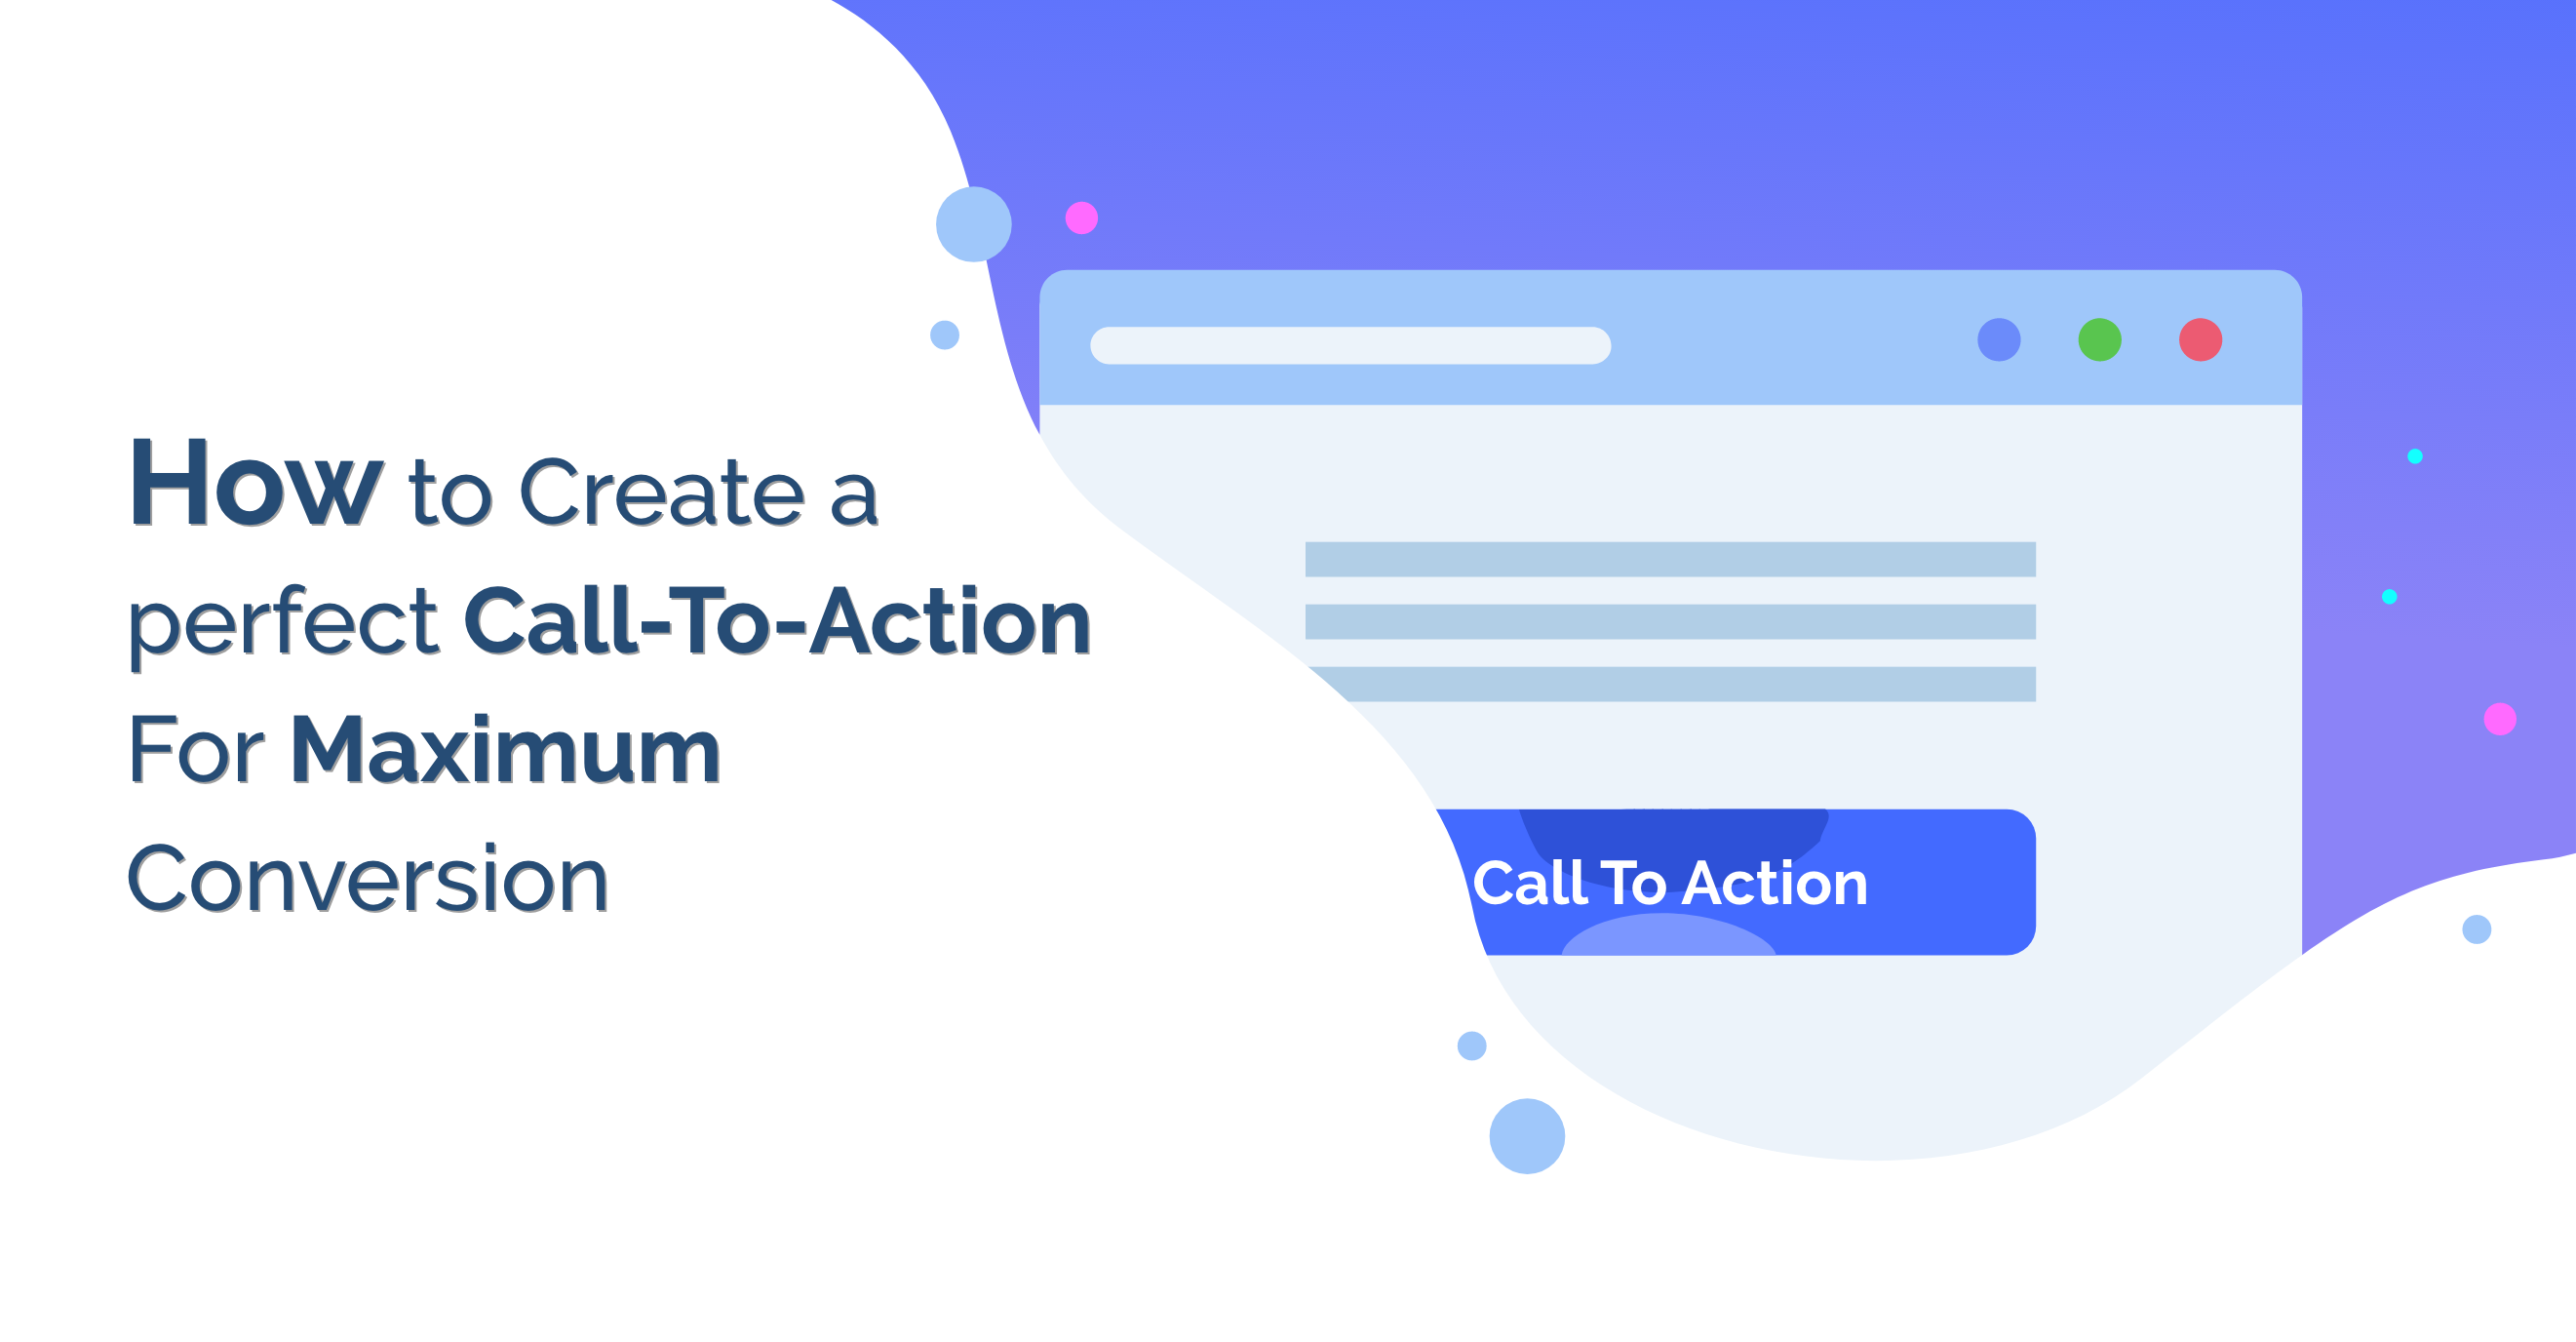 How to Create a perfect Call-To-Action (CTA) For Maximum Conversion